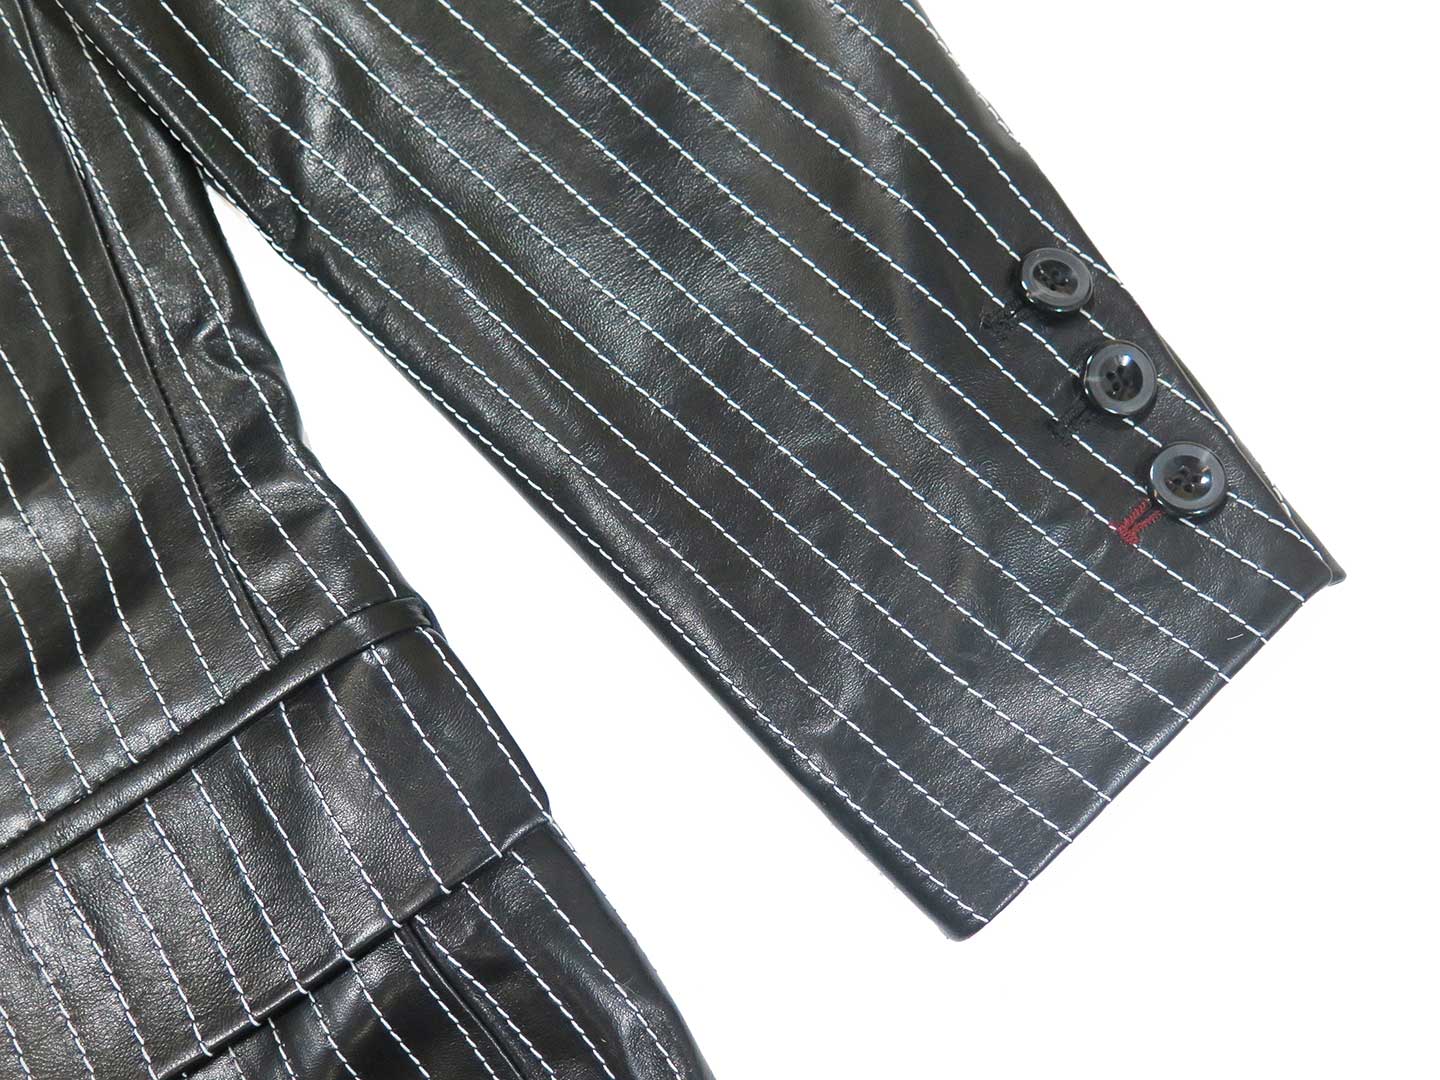 The Bespoke Pinstripe Suit - Elegance in Leather - Made in NYC